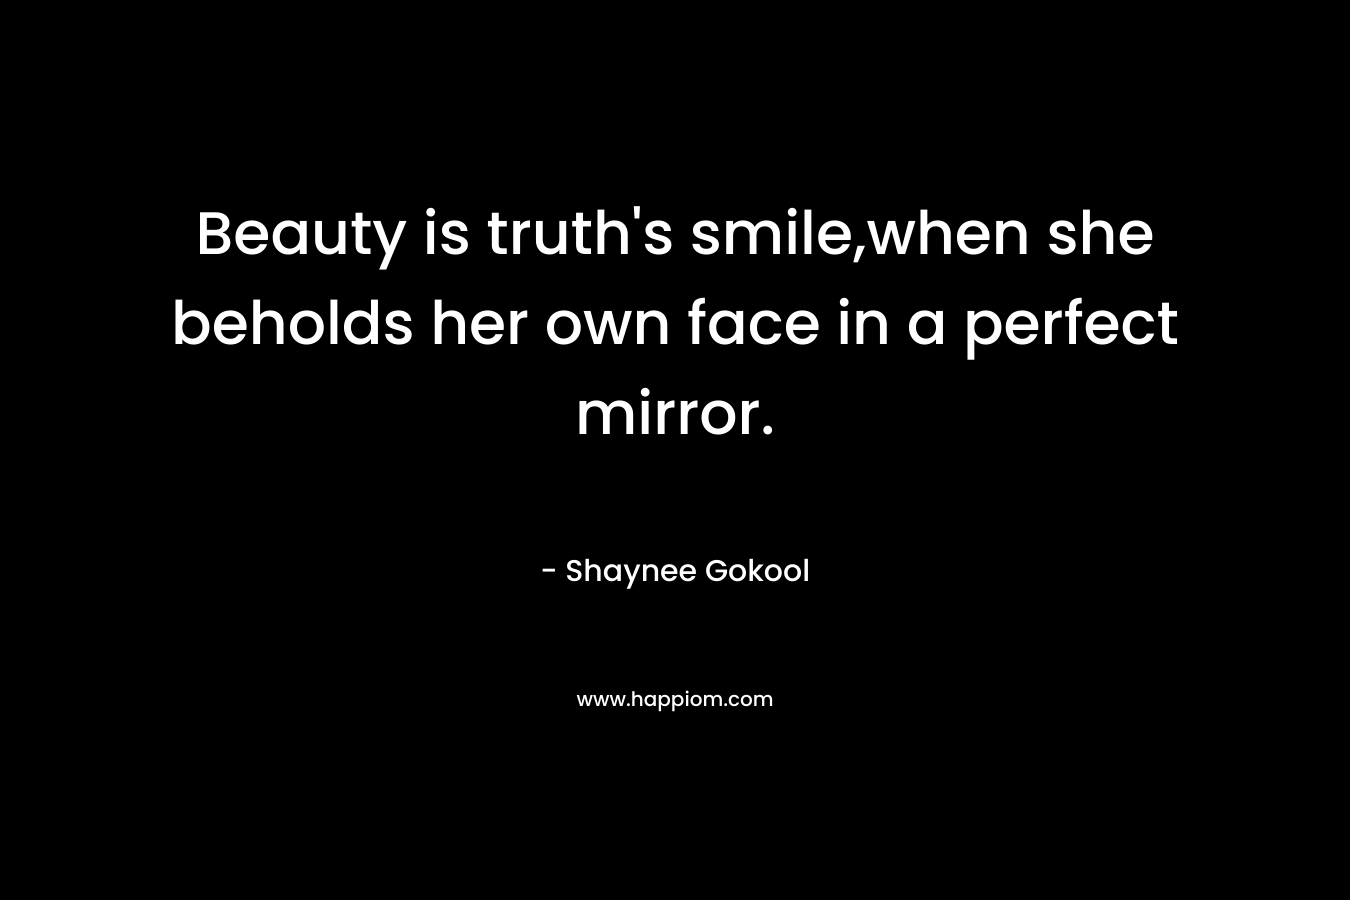 Beauty is truth's smile,when she beholds her own face in a perfect mirror.